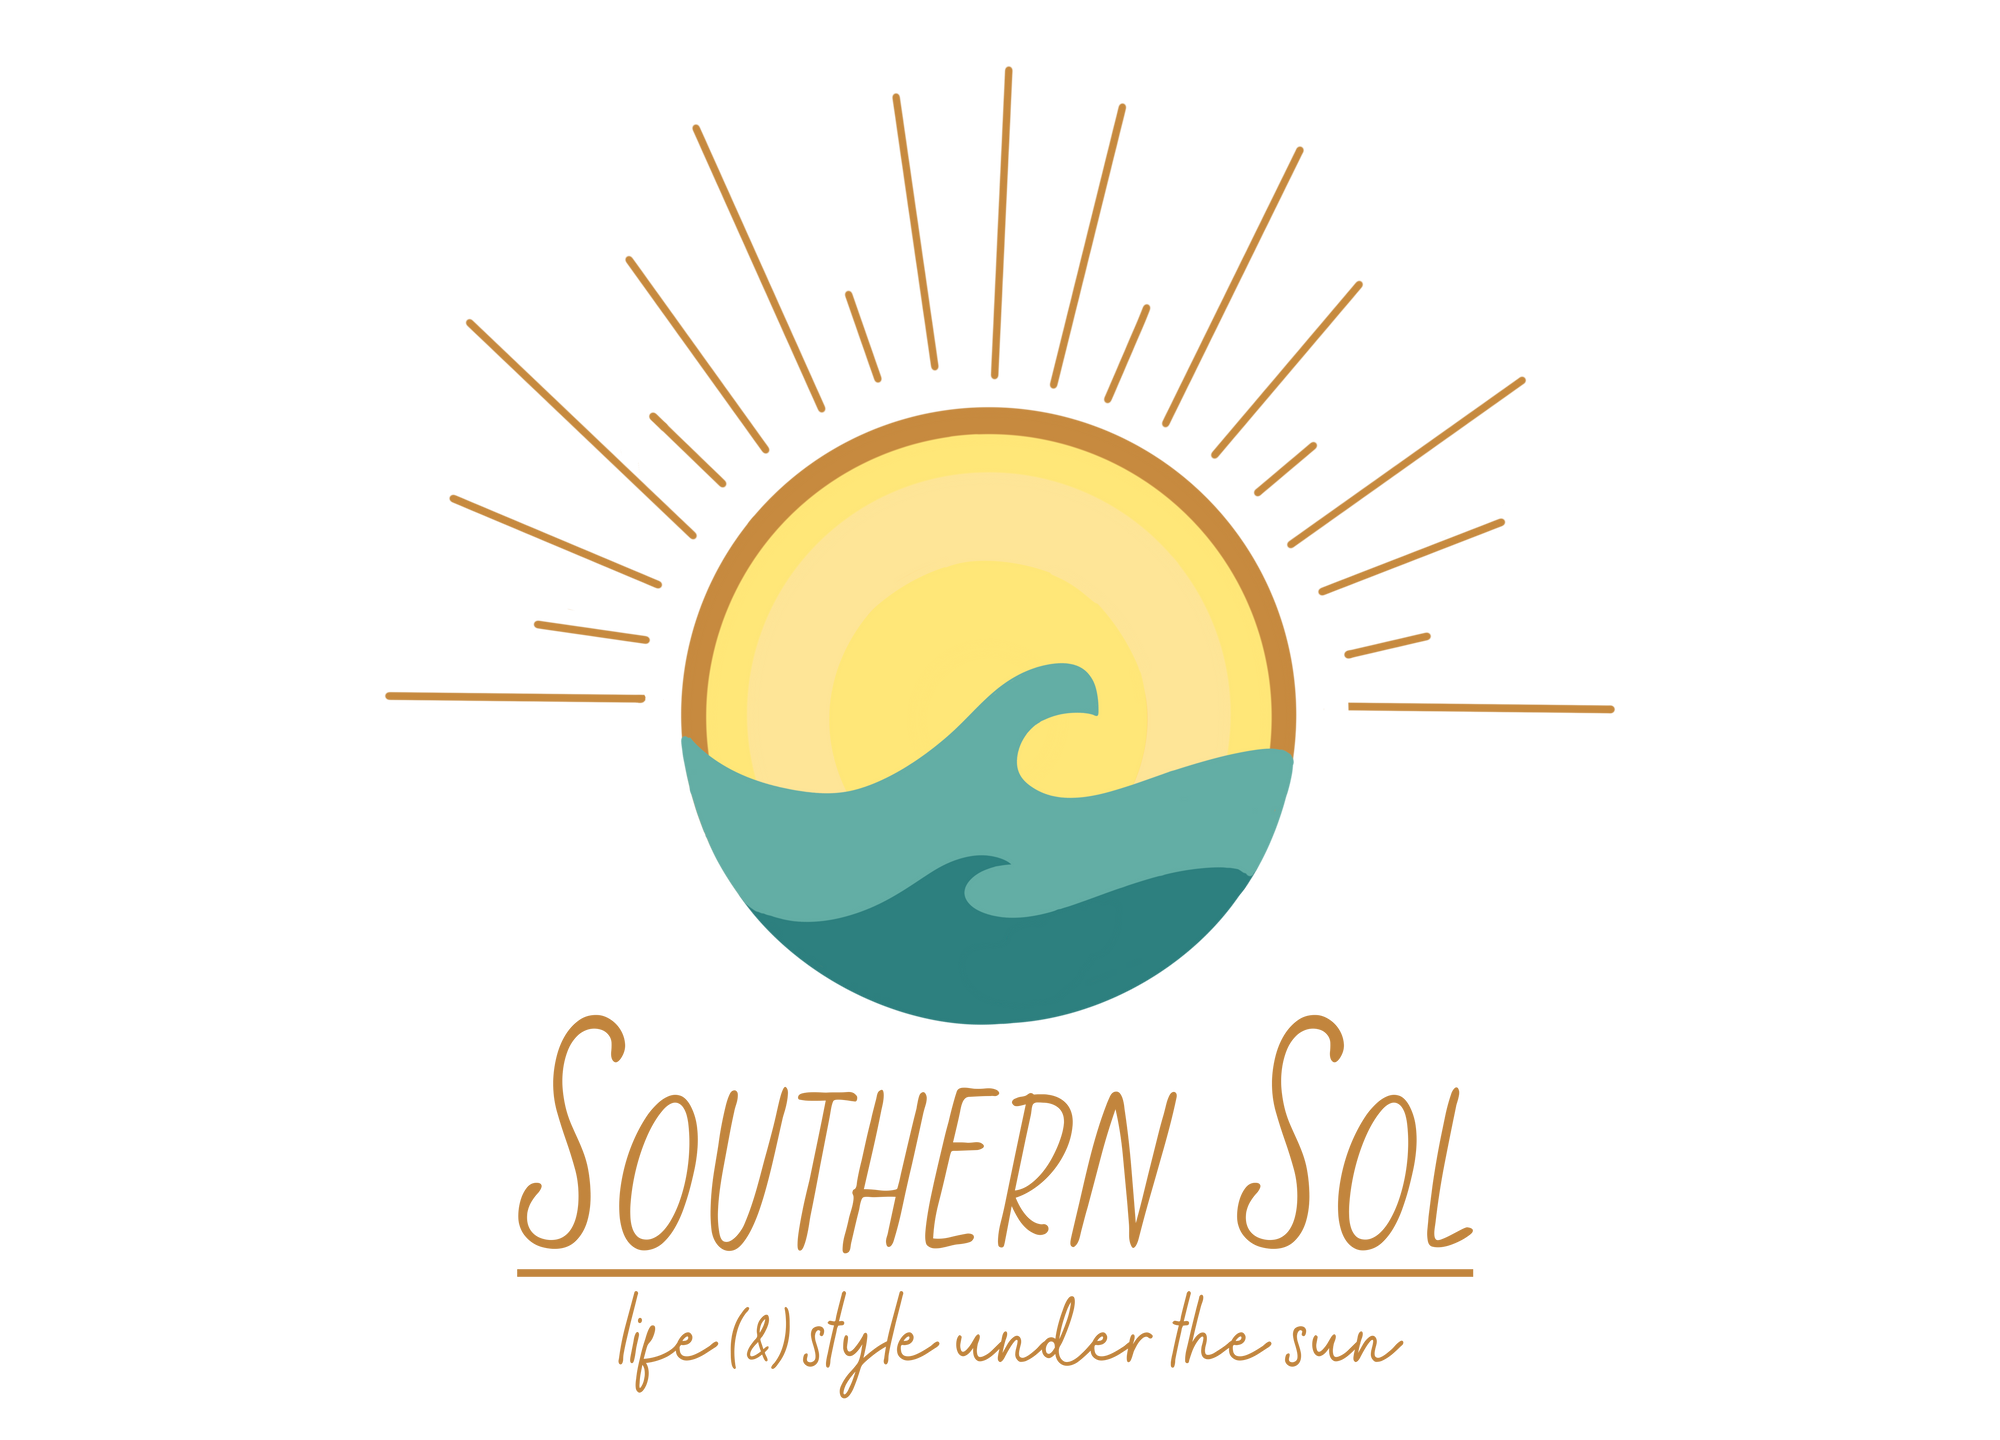 Southern Sol, life (&) style under the sun 